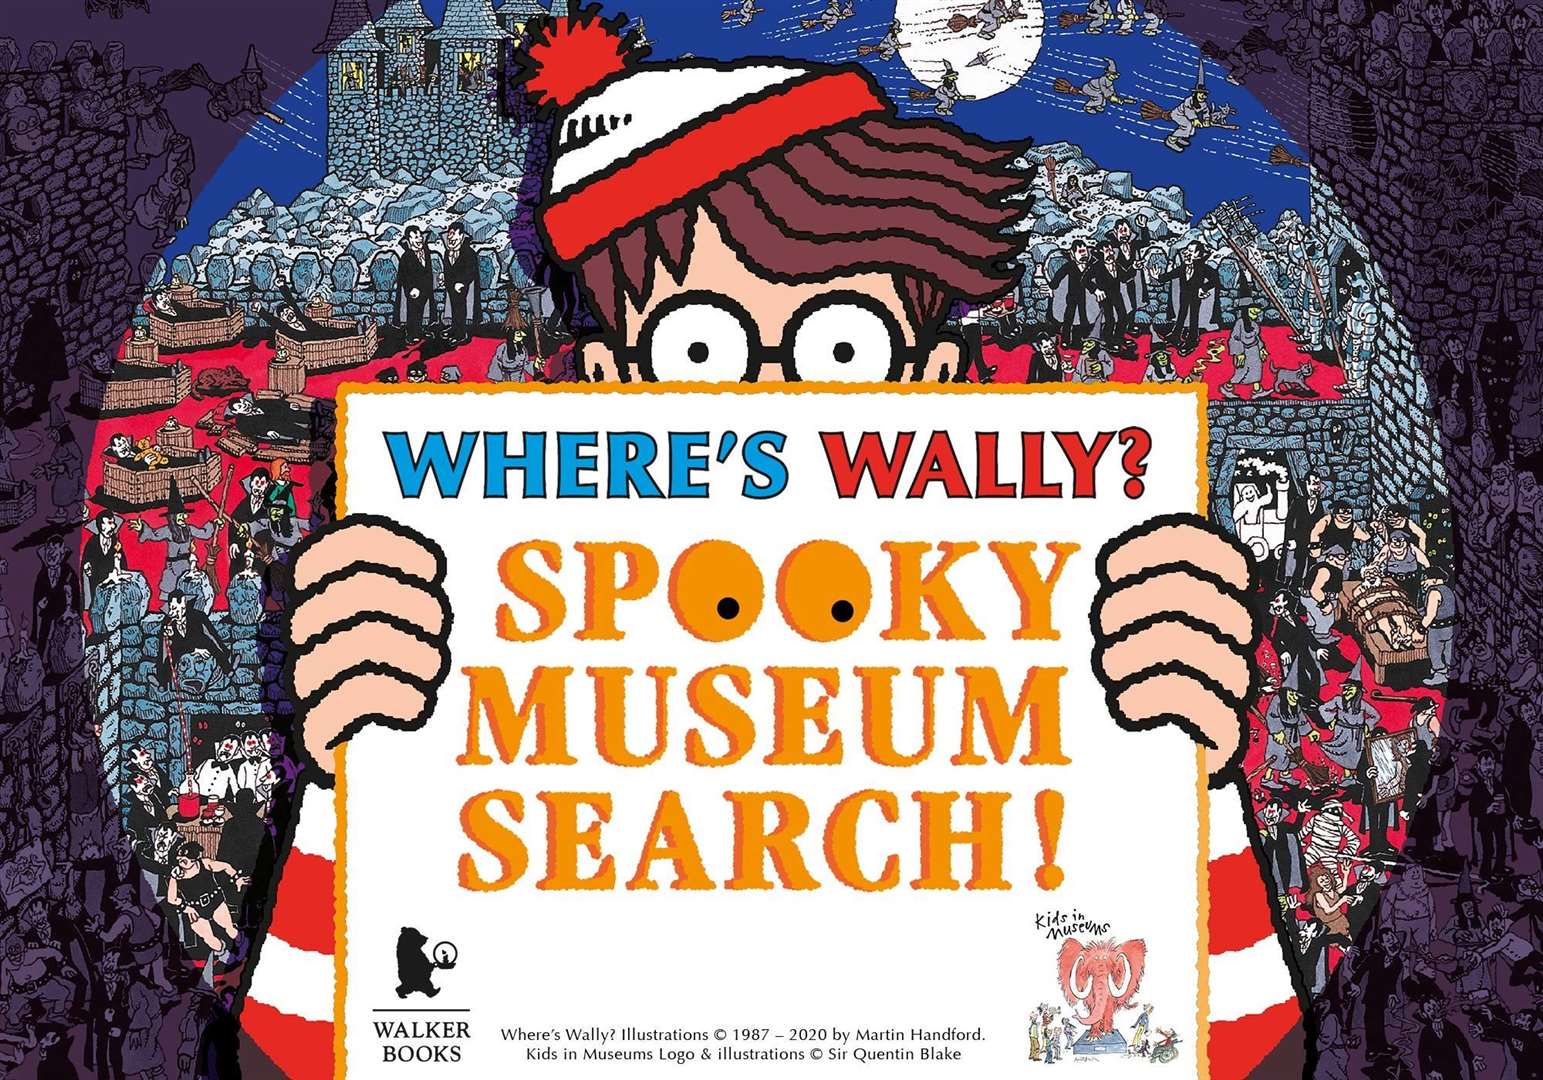 Where's Wally Spooky Museum Search is happening at the Historic Dockyard